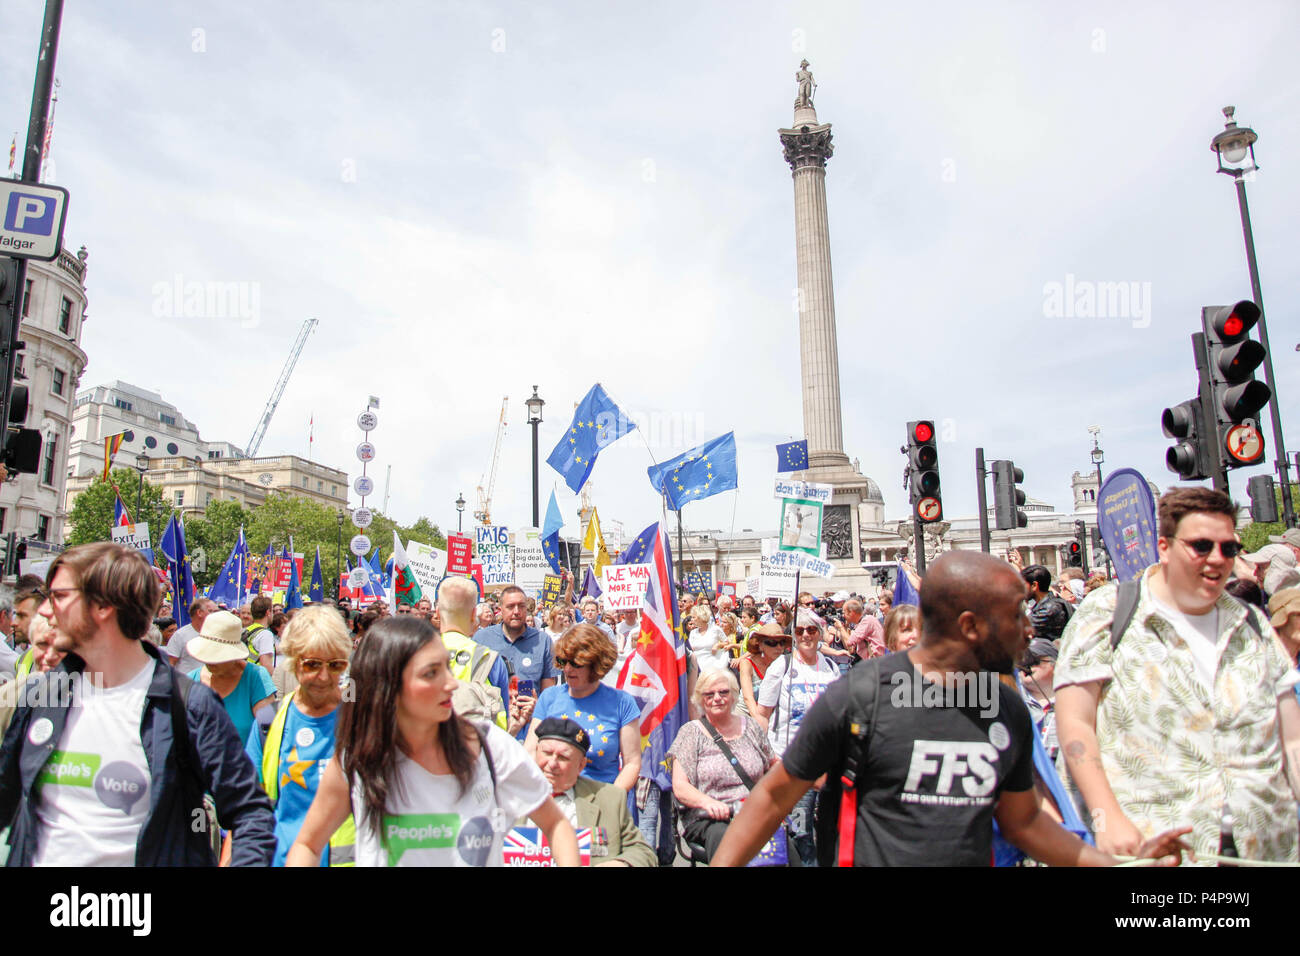 London, UK. 23rd June 2018. Anti-Brexit protesters at the People's Vote March Credit: Alex Cavendish/Alamy Live News Stock Photo